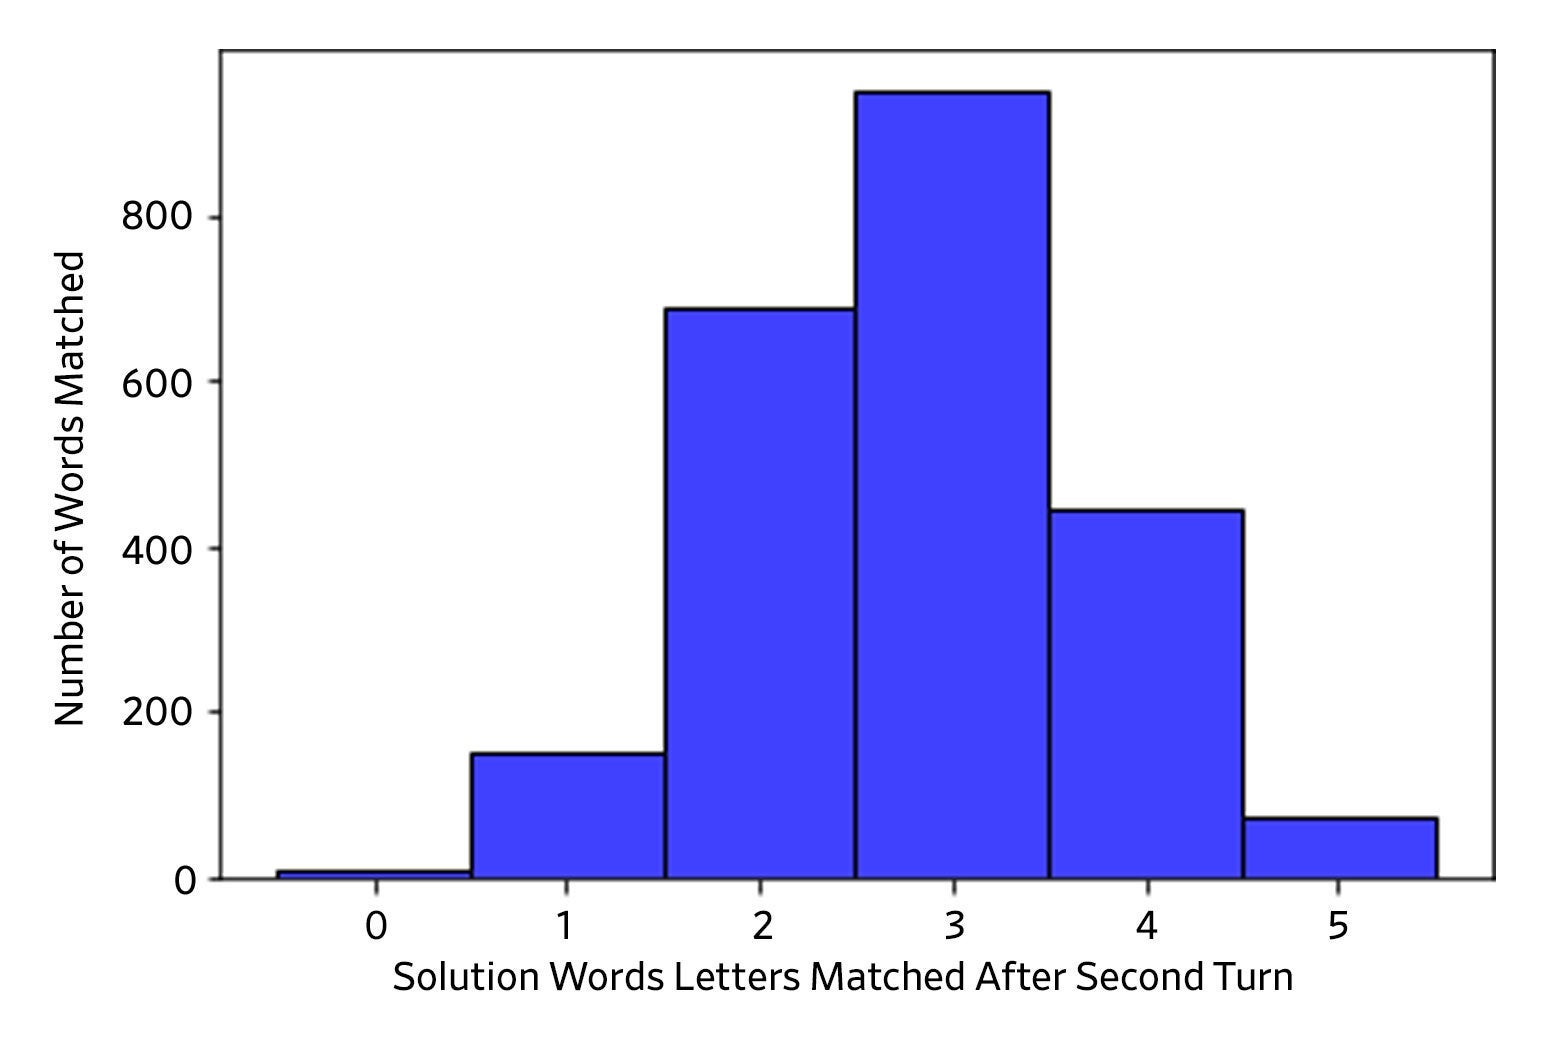 Chart of word matches after second turn